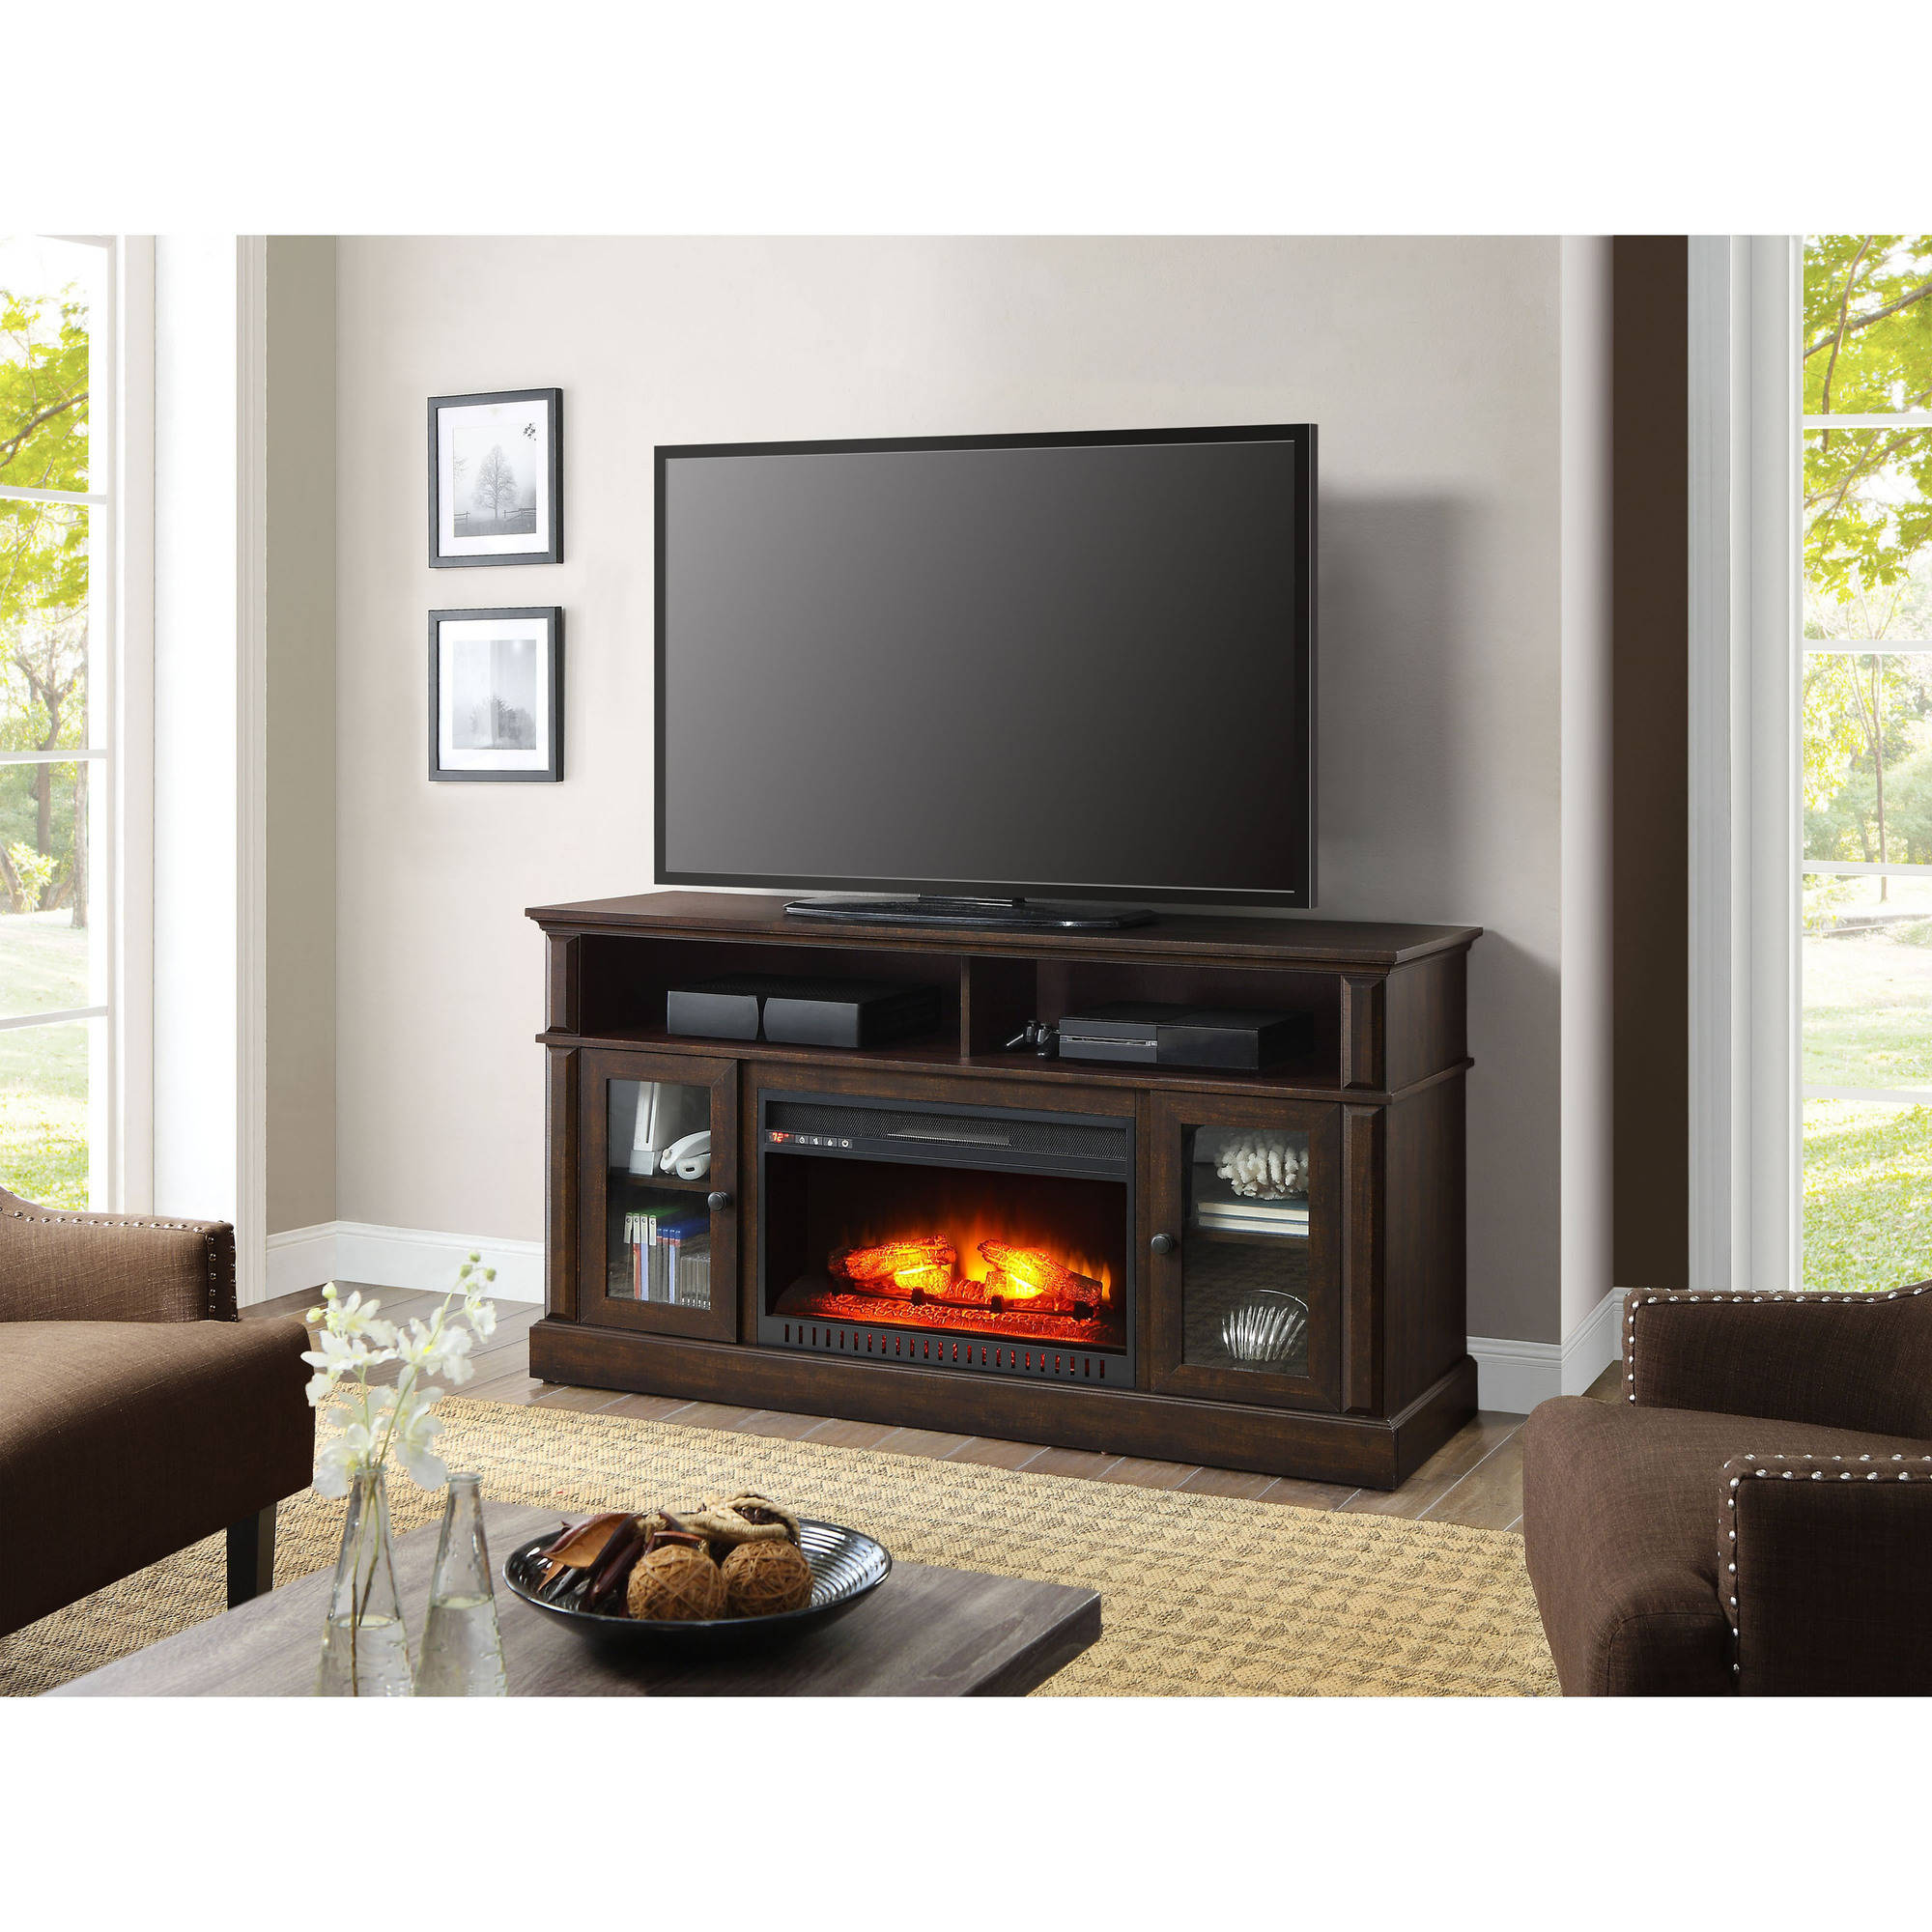 60 Inch Tv Stand with Fireplace Inspirational Whalen Barston Media Fireplace for Tv S Up to 70 Multiple